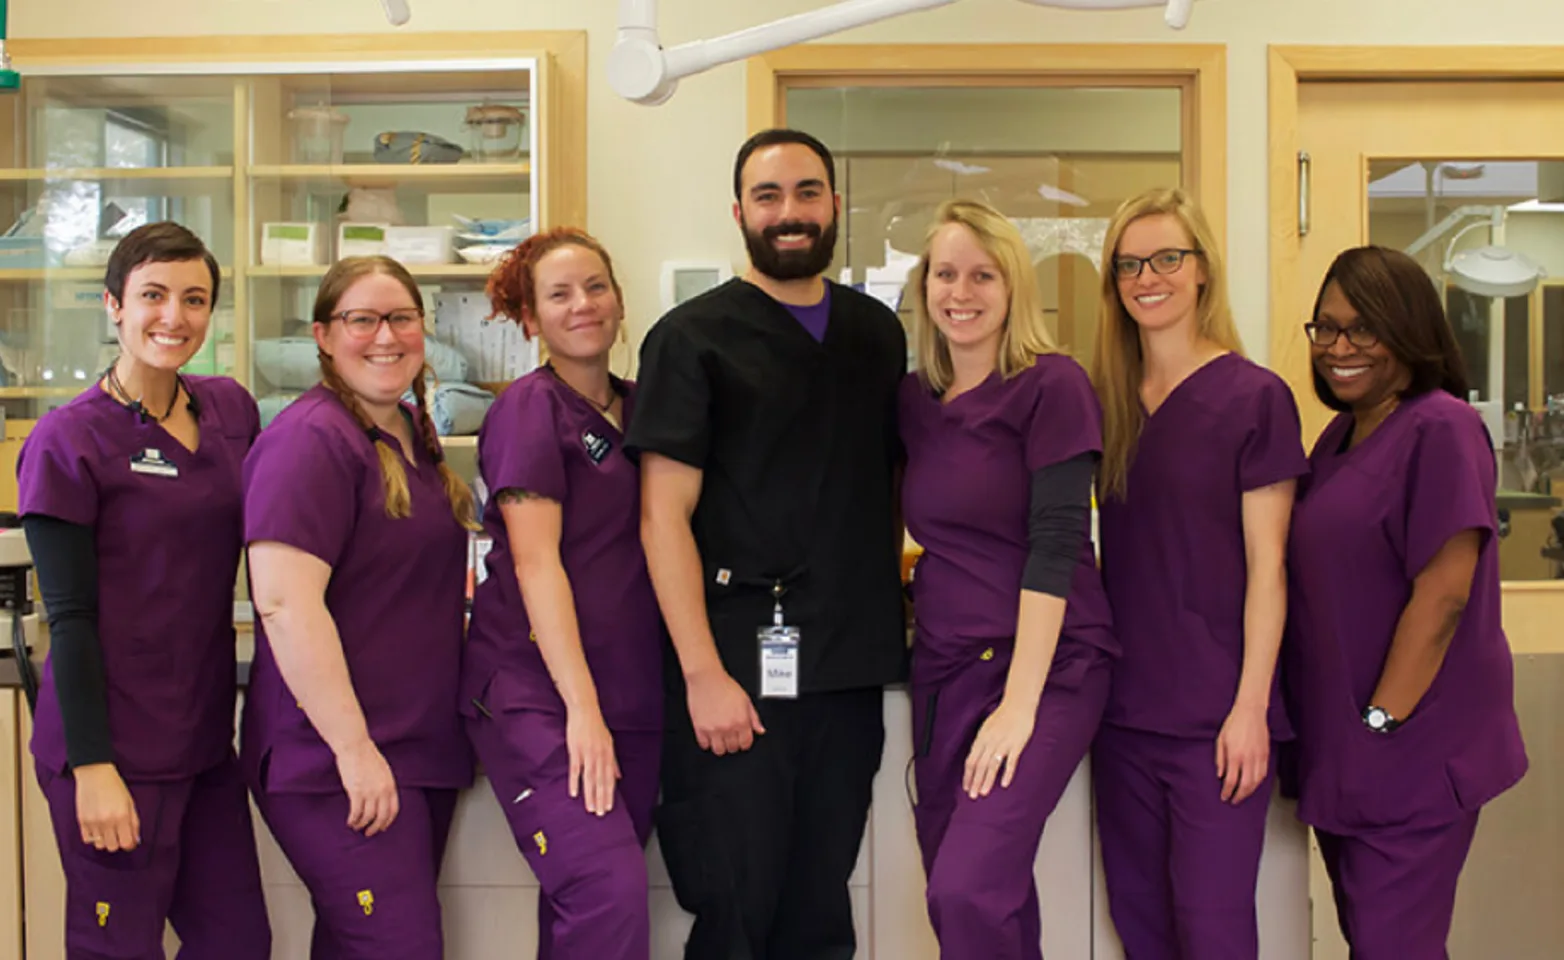 Small staff photo in purple at Overland Animal Hospital